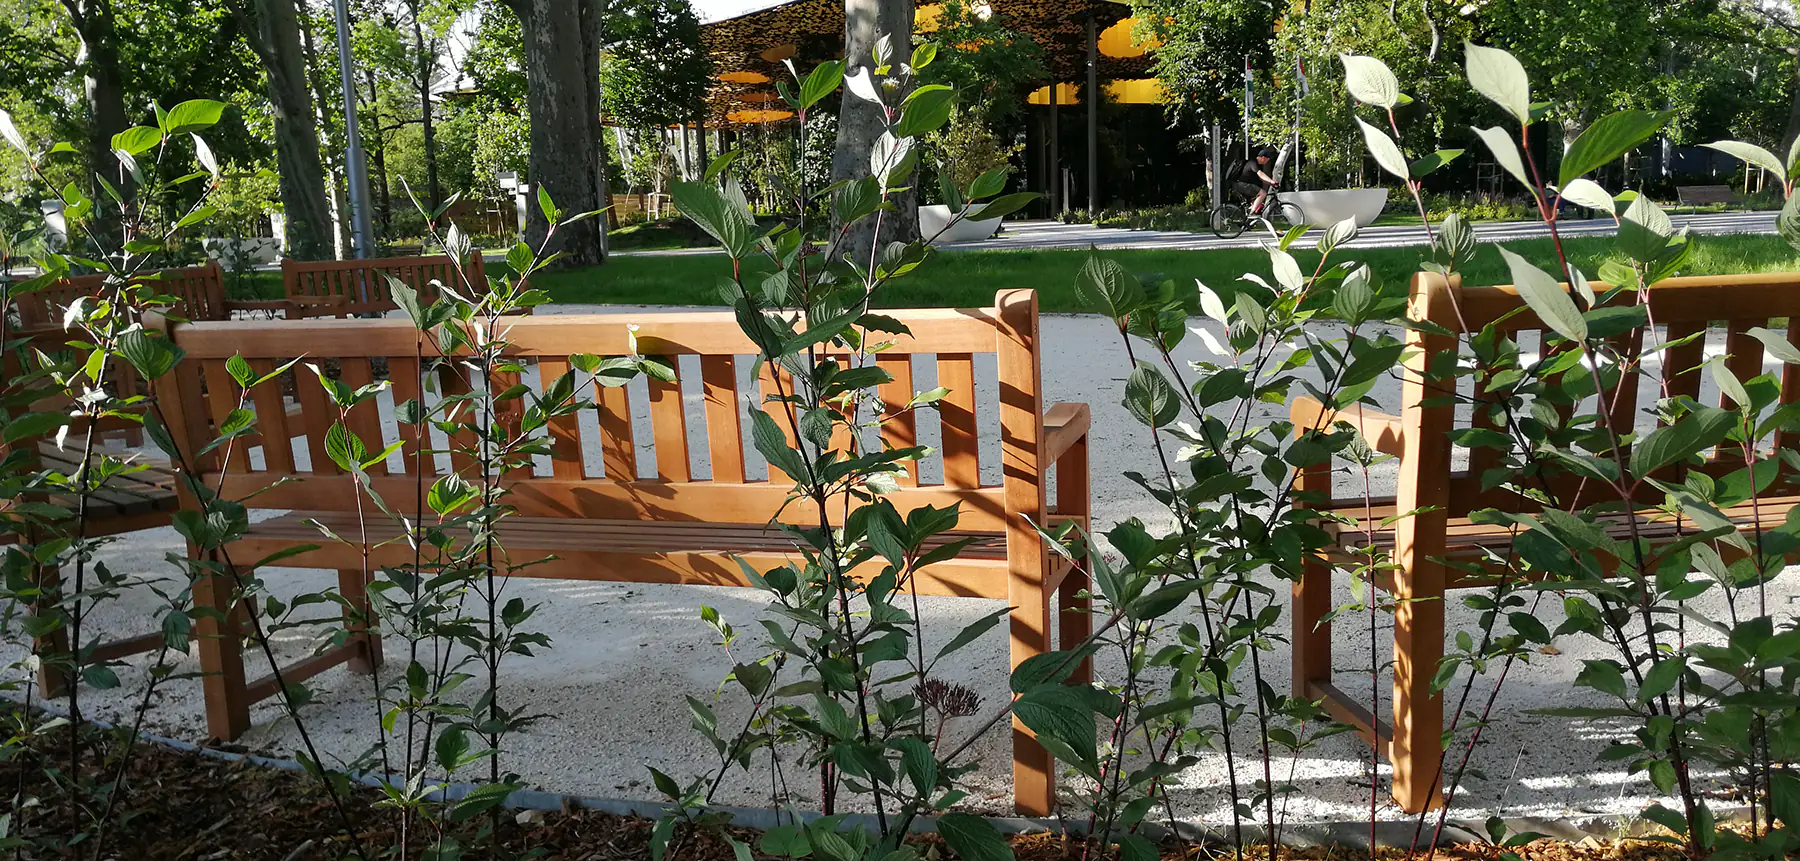 FSC wooden benches for parks